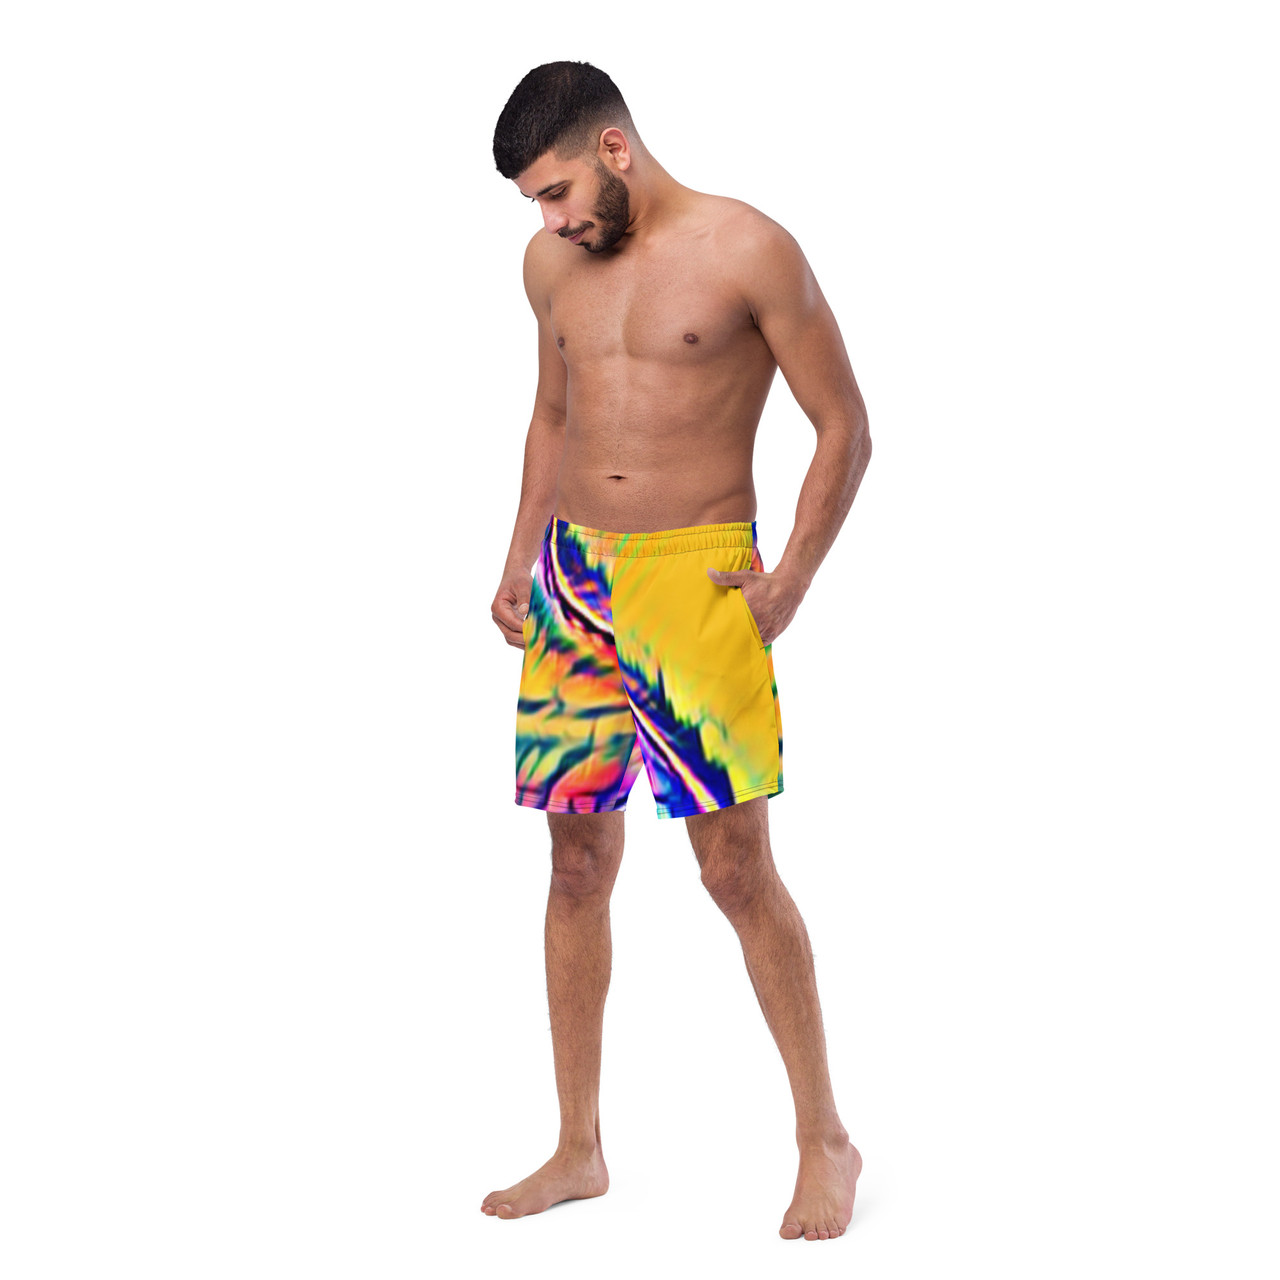 Discover the Collection of Men's Swimming Trunks